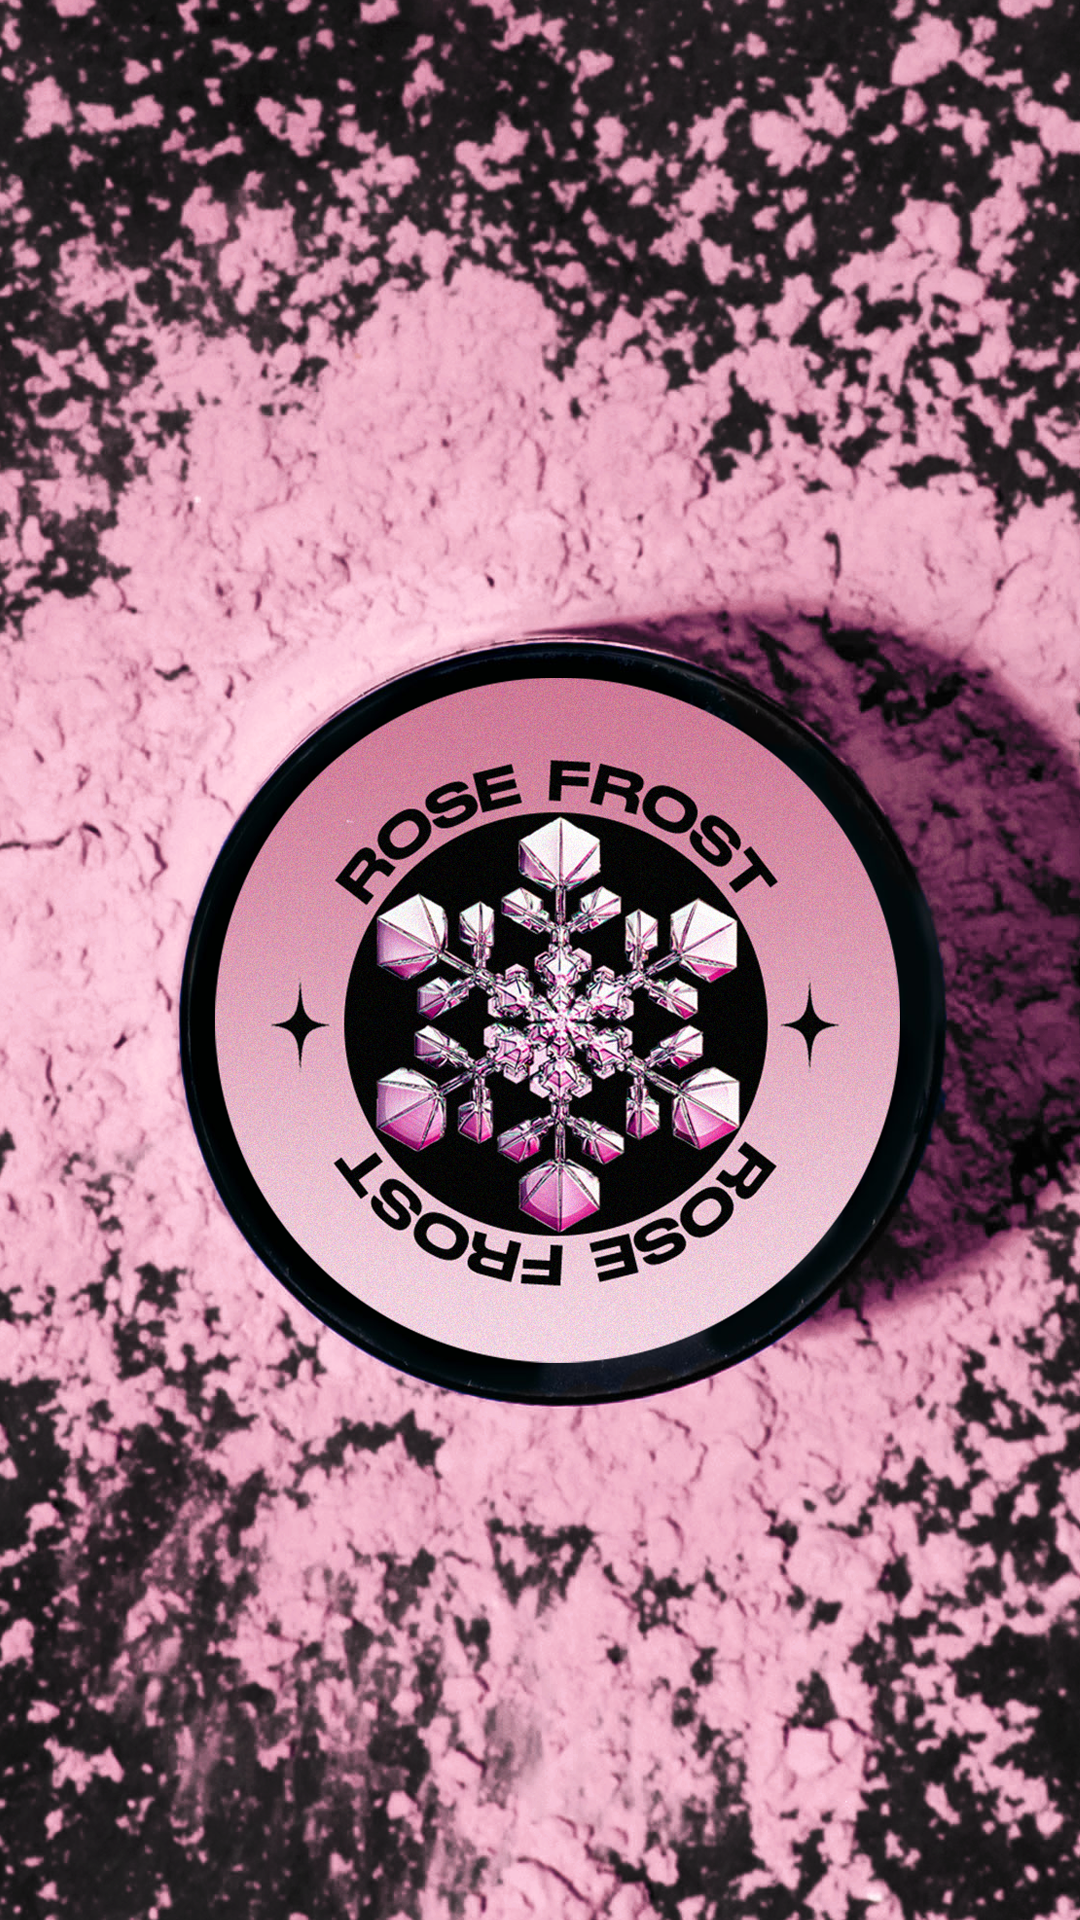 ROSE FROST